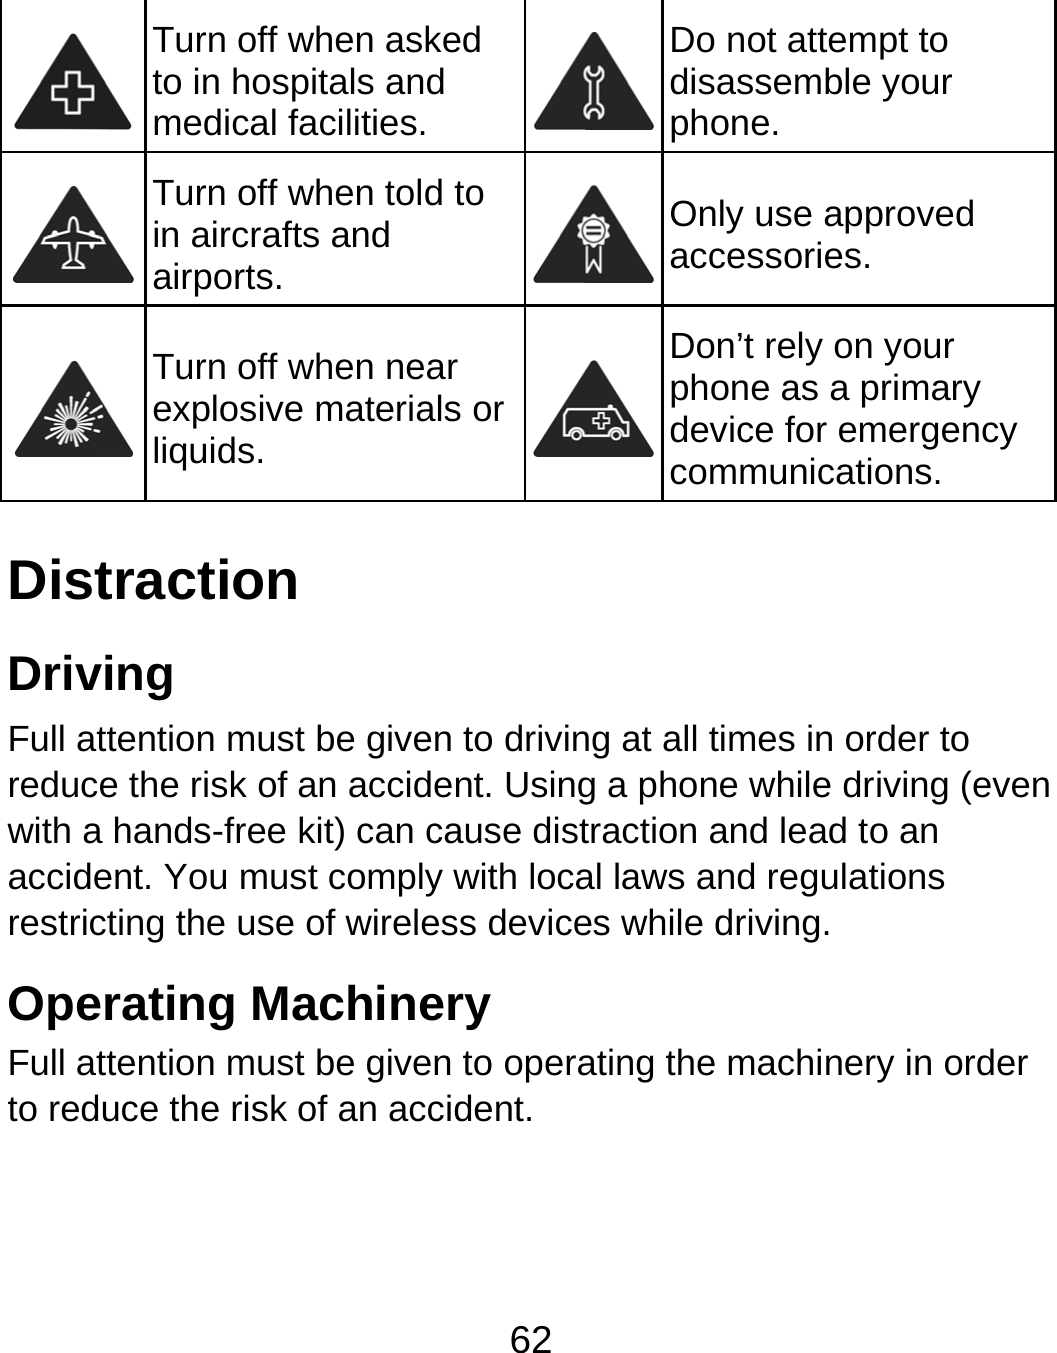 62  Turn off when asked to in hospitals and medical facilities. Do not attempt to disassemble your phone.  Turn off when told to in aircrafts and airports. Only use approved accessories.  Turn off when near explosive materials or liquids. Don’t rely on your phone as a primary device for emergency communications.  Distraction Driving Full attention must be given to driving at all times in order to reduce the risk of an accident. Using a phone while driving (even with a hands-free kit) can cause distraction and lead to an accident. You must comply with local laws and regulations restricting the use of wireless devices while driving. Operating Machinery Full attention must be given to operating the machinery in order to reduce the risk of an accident. 